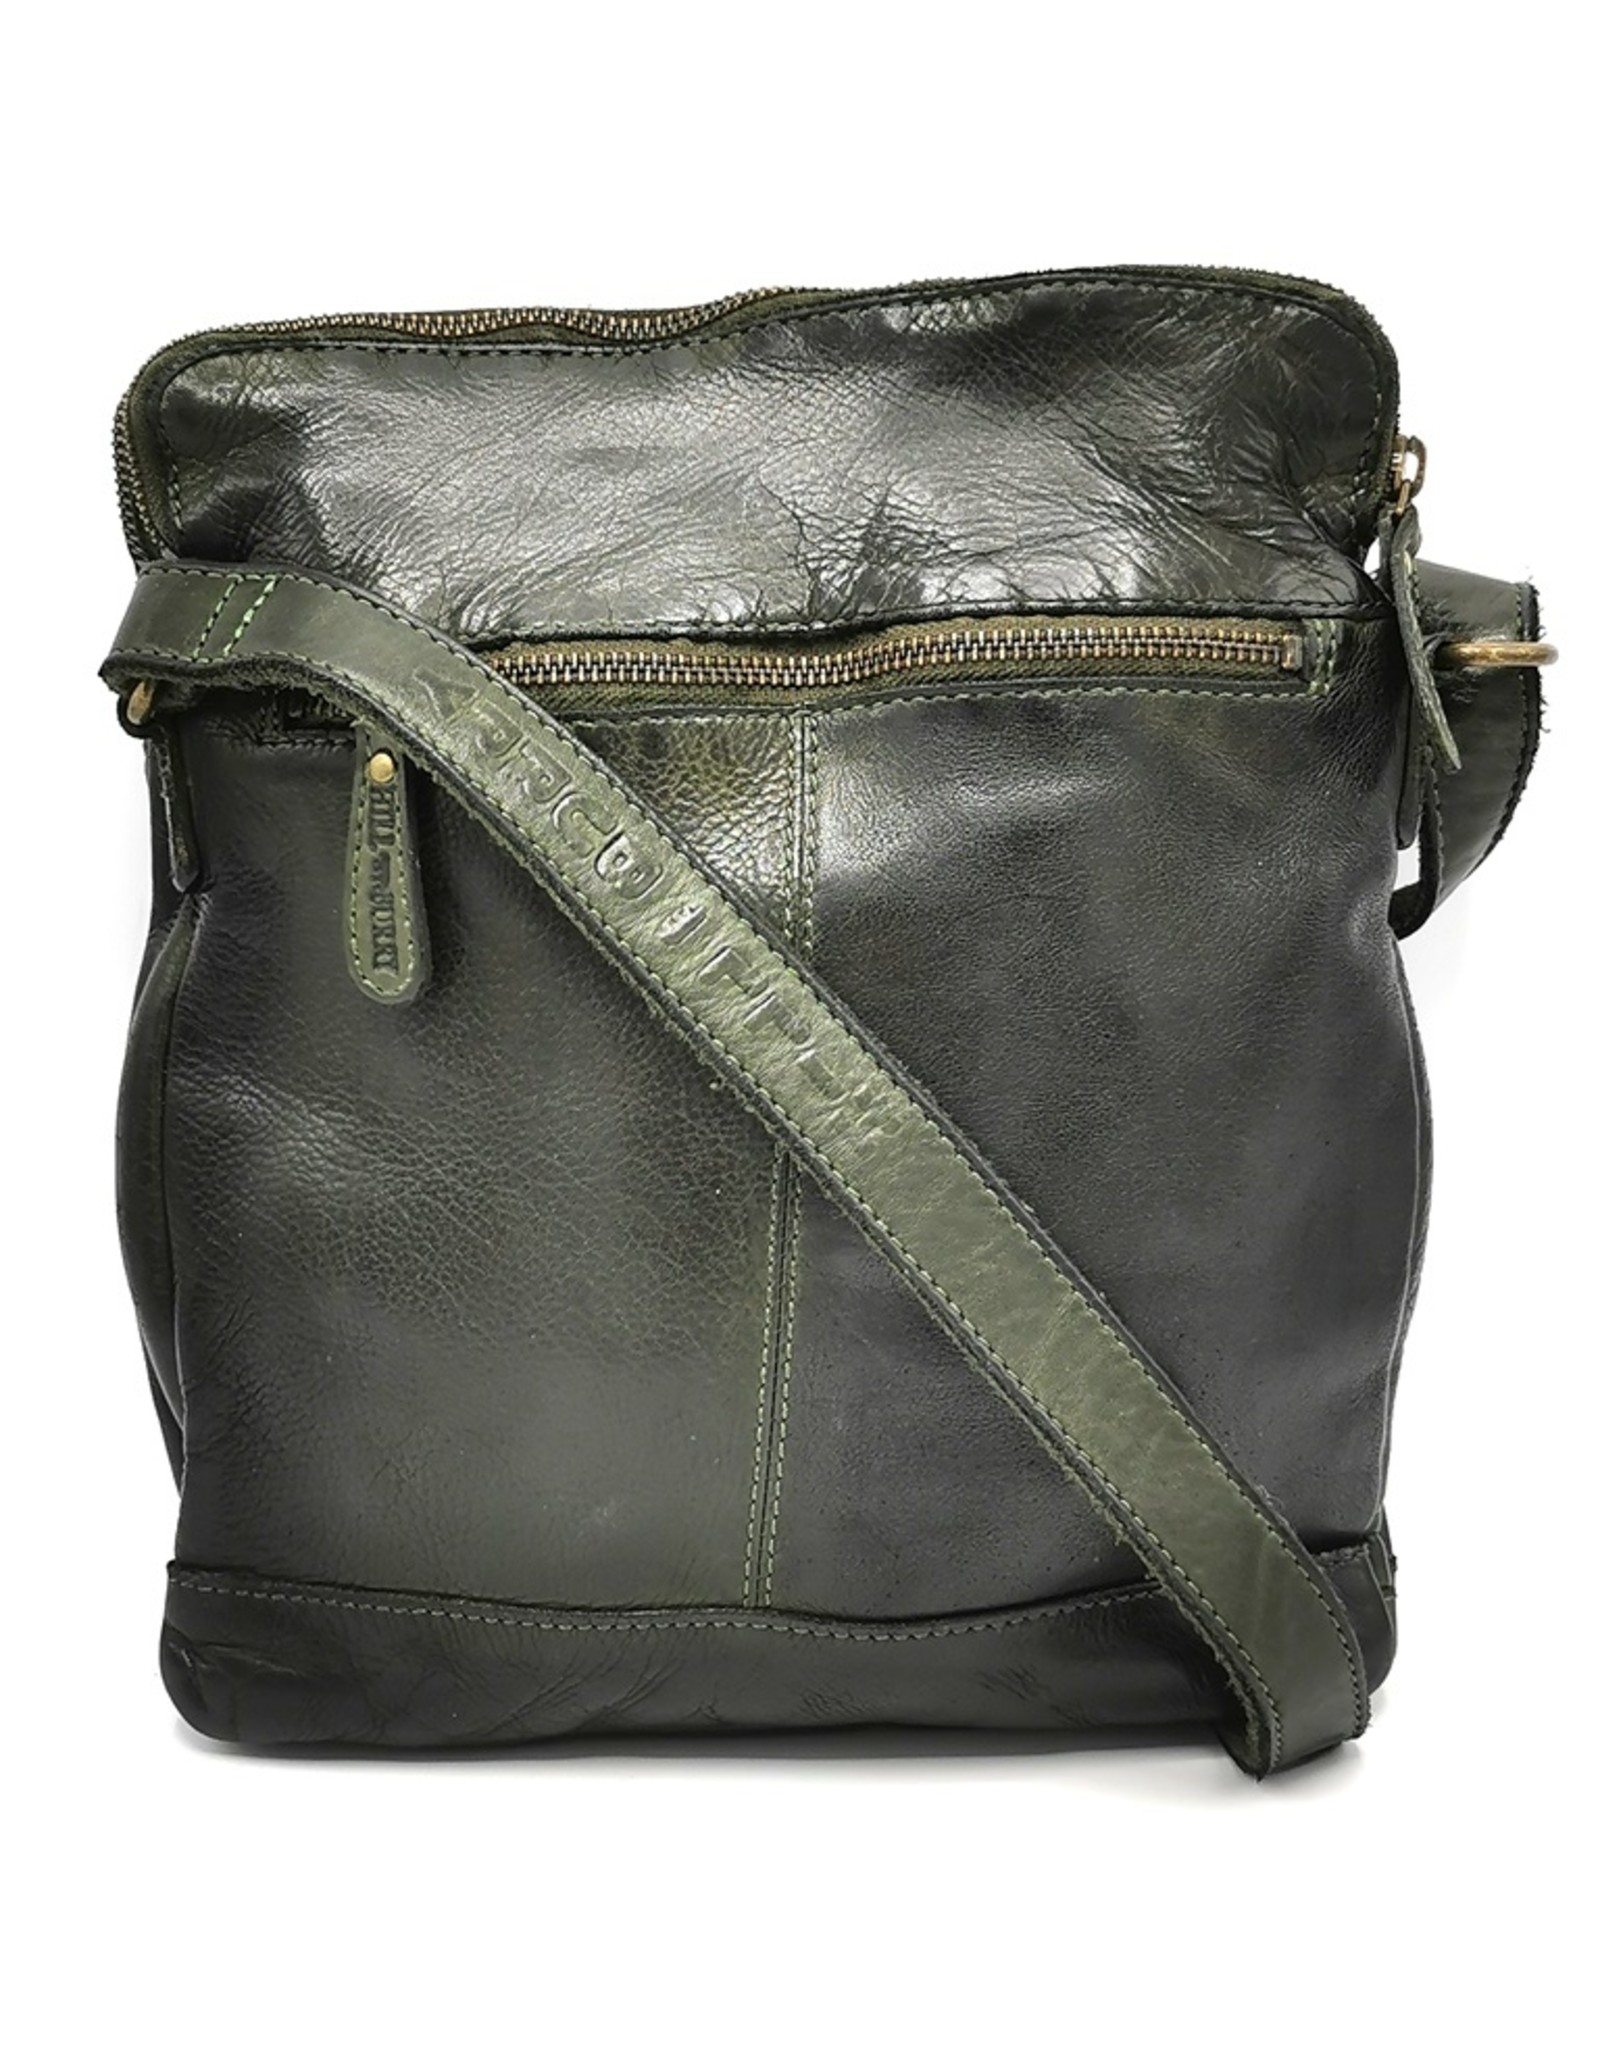 HillBurry Leather Shoulder bags  Leather crossbody bags - HillBurry Shoulder Bag Washed Leather  khaki